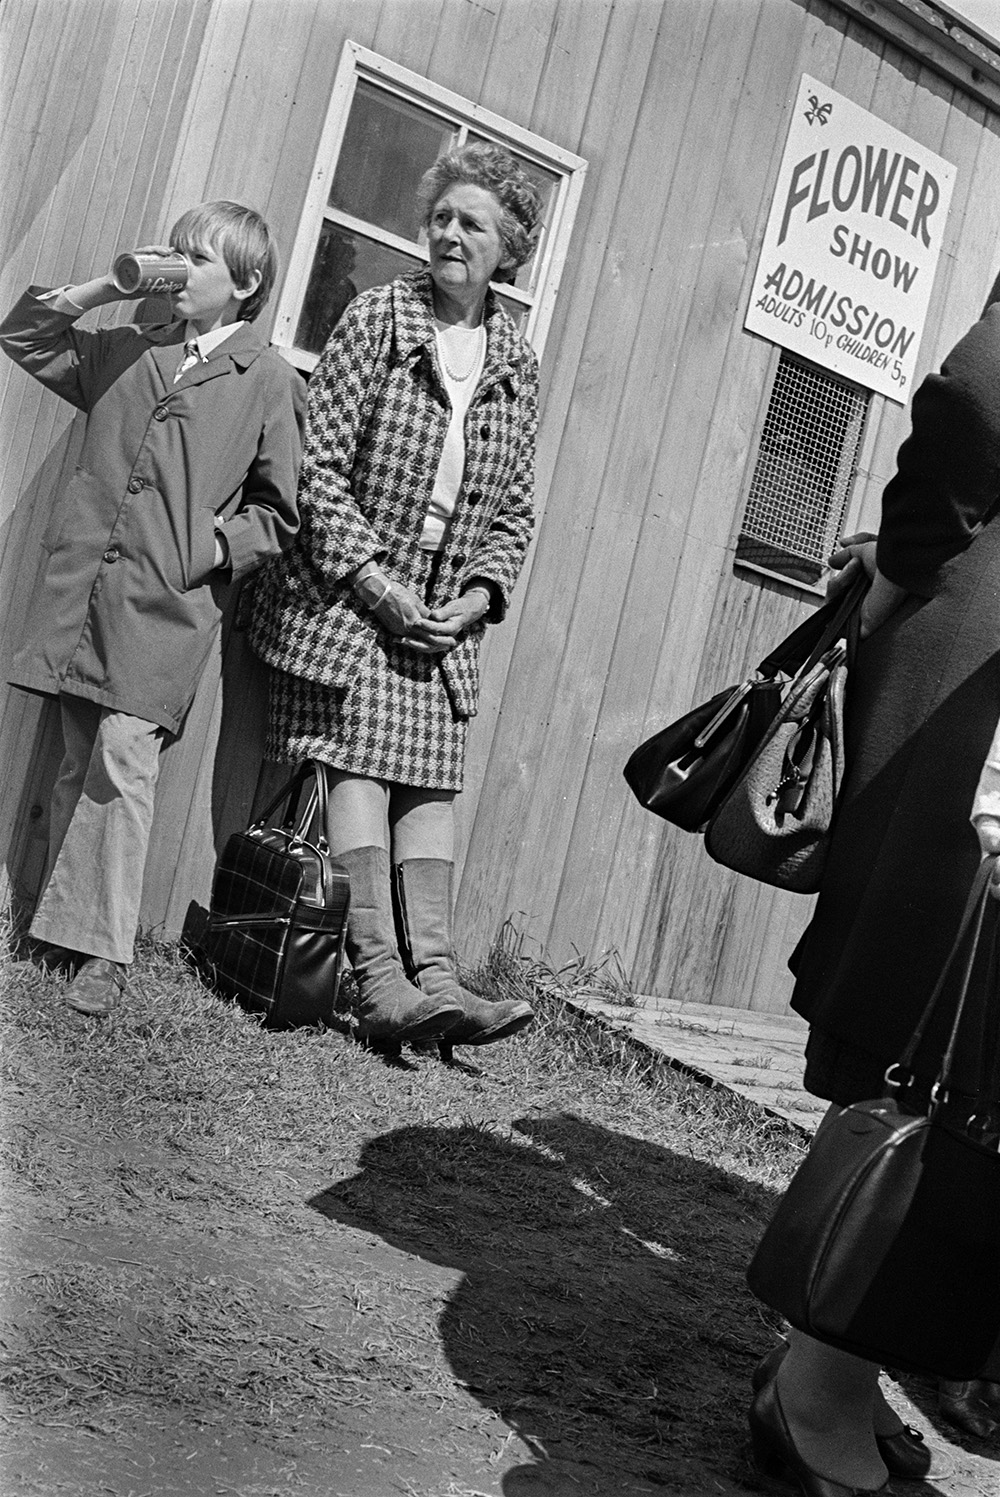 A woman and boy visiting the Devon County Show at Whipton, Exeter. They are stood outside the flower show admission hut. The boy is drinking from a can.